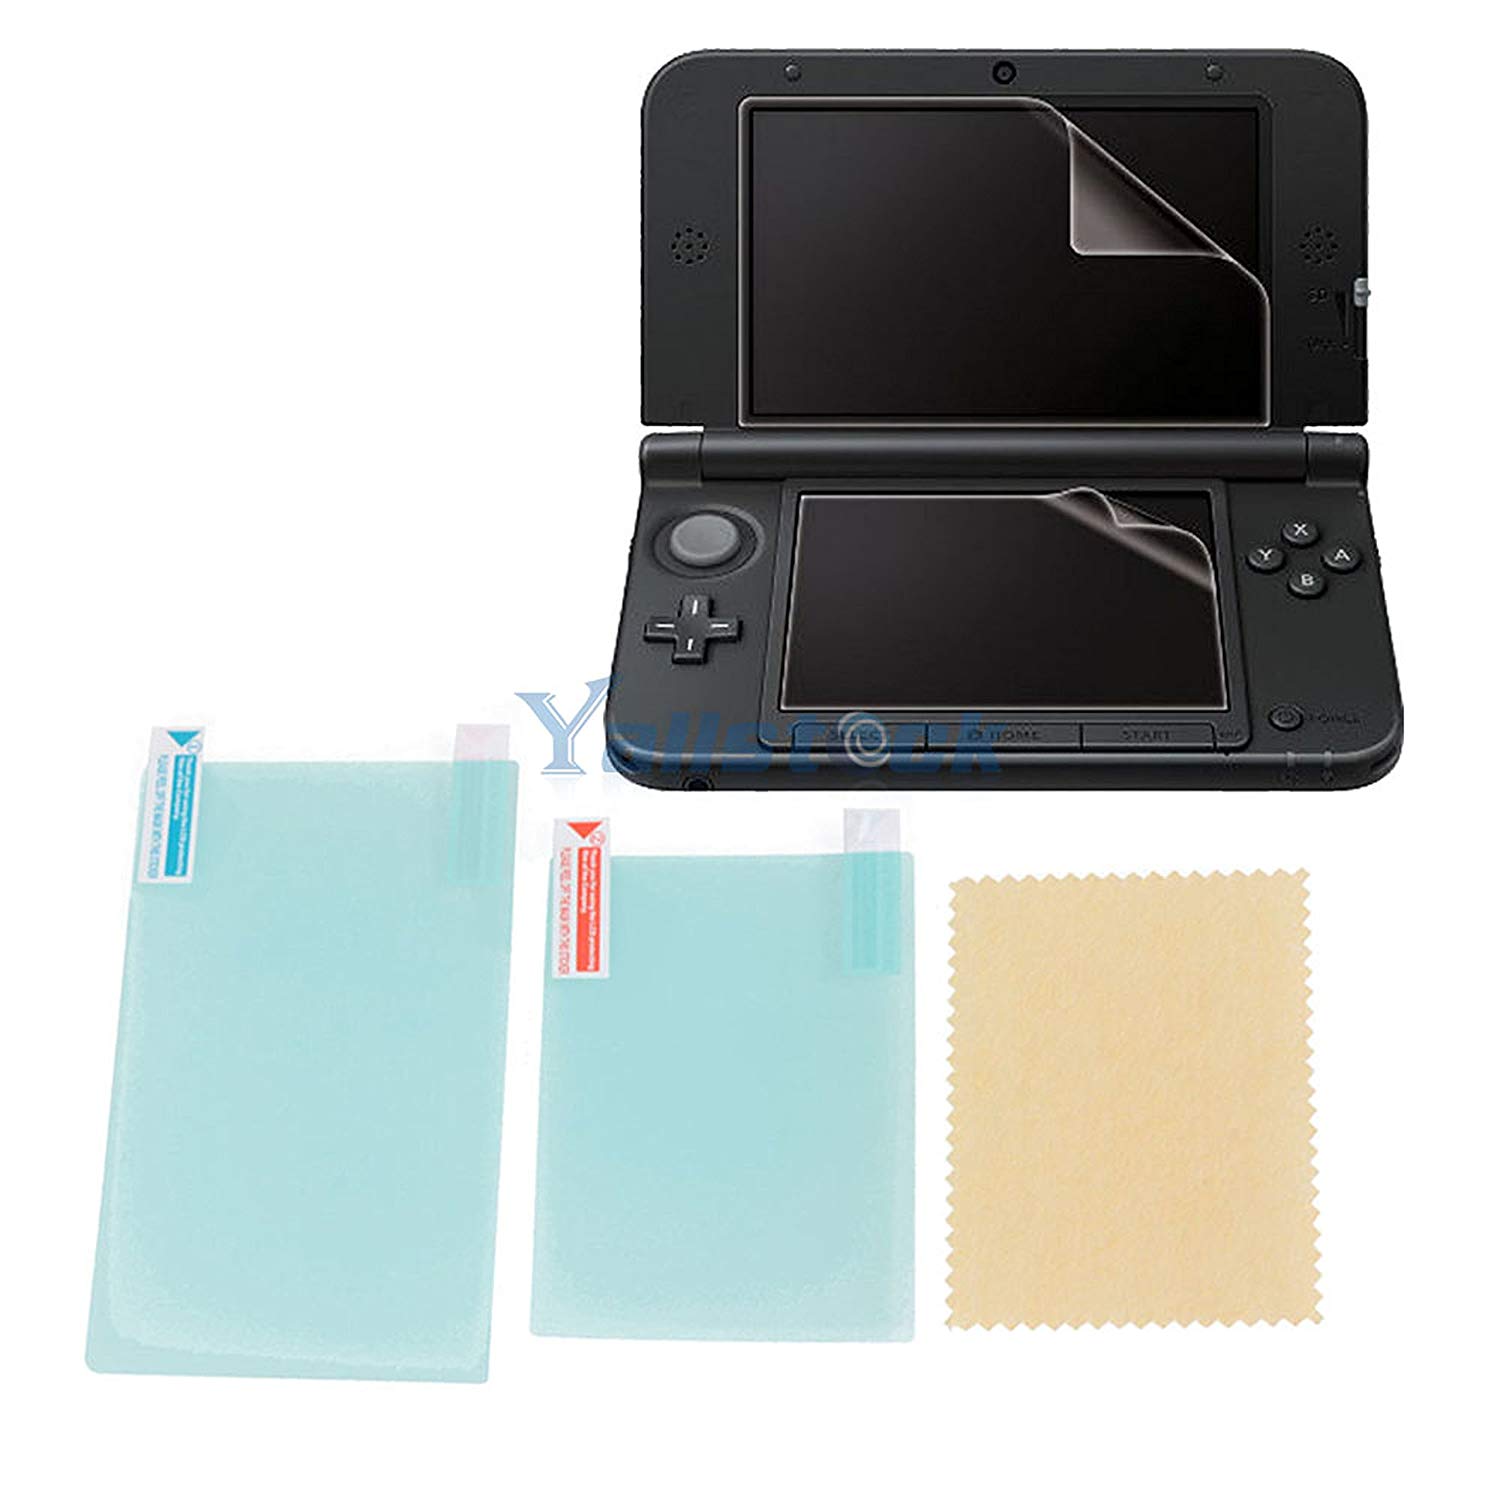 New Screen Protector Film Scratch Guard Protector for New Nintendo 3DS XL